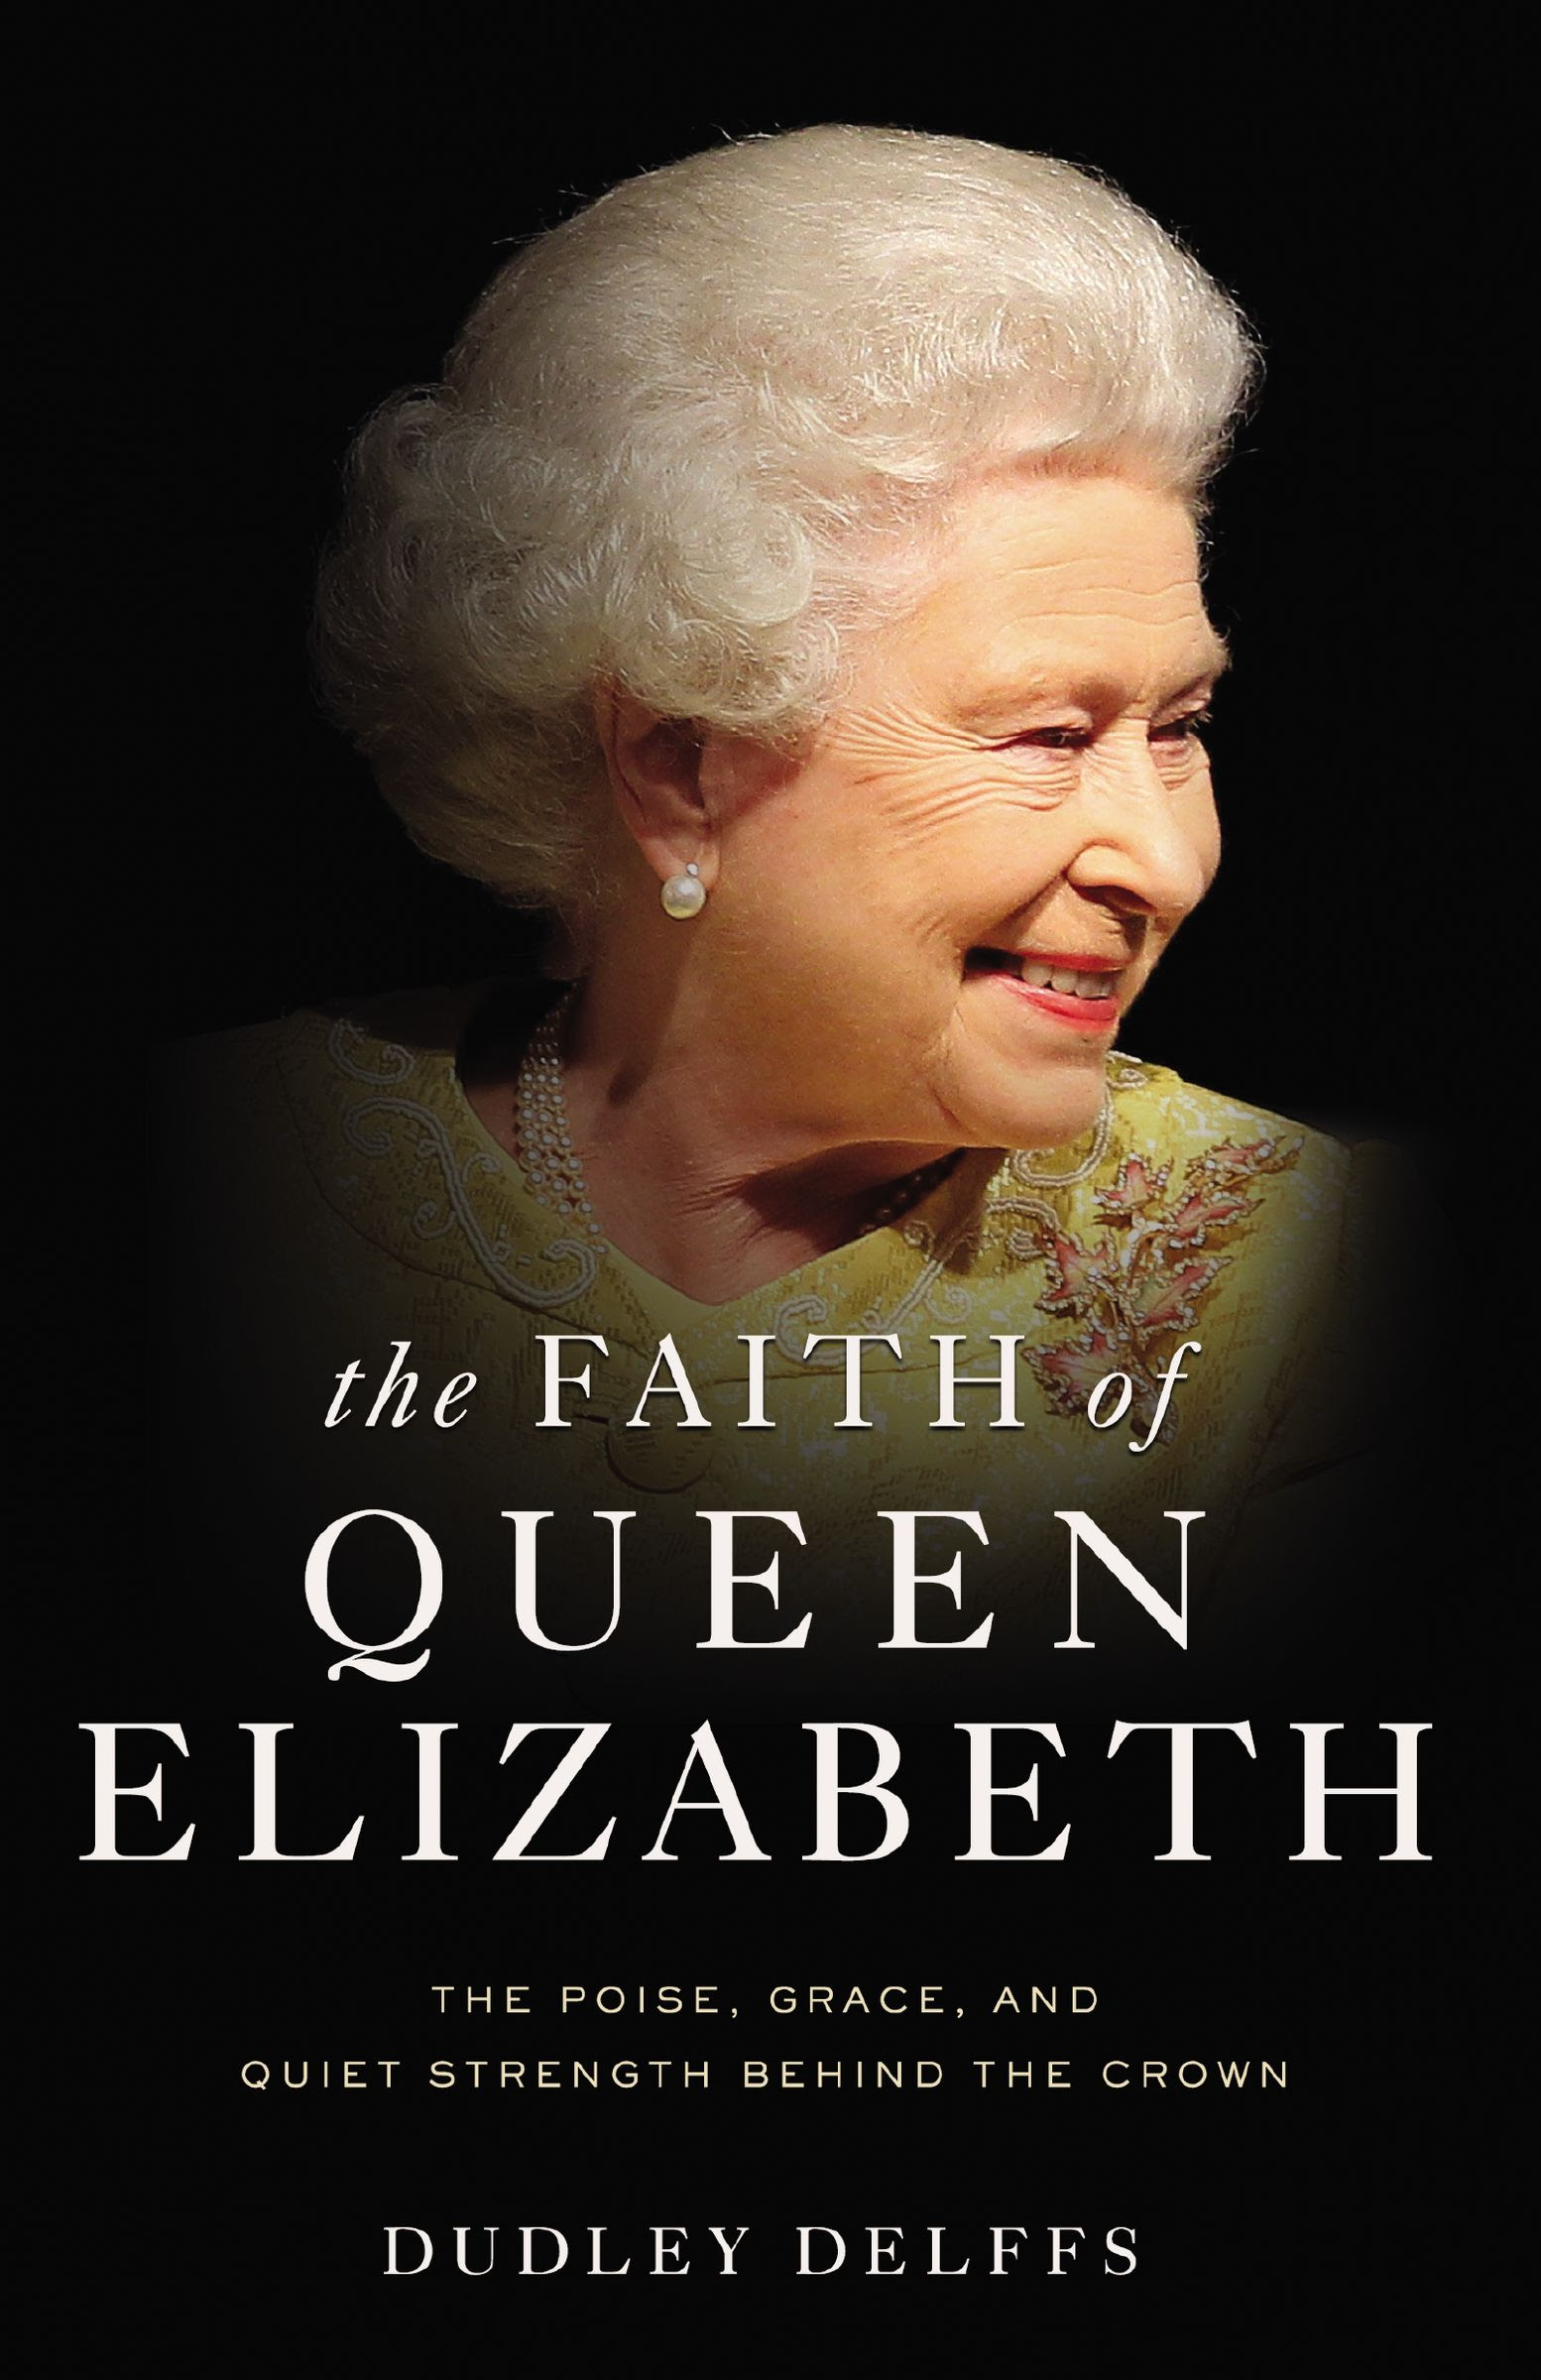 The Faith of Queen Elizabeth: The Poise, Grace, and Quiet Strength Behind the Crown PDF